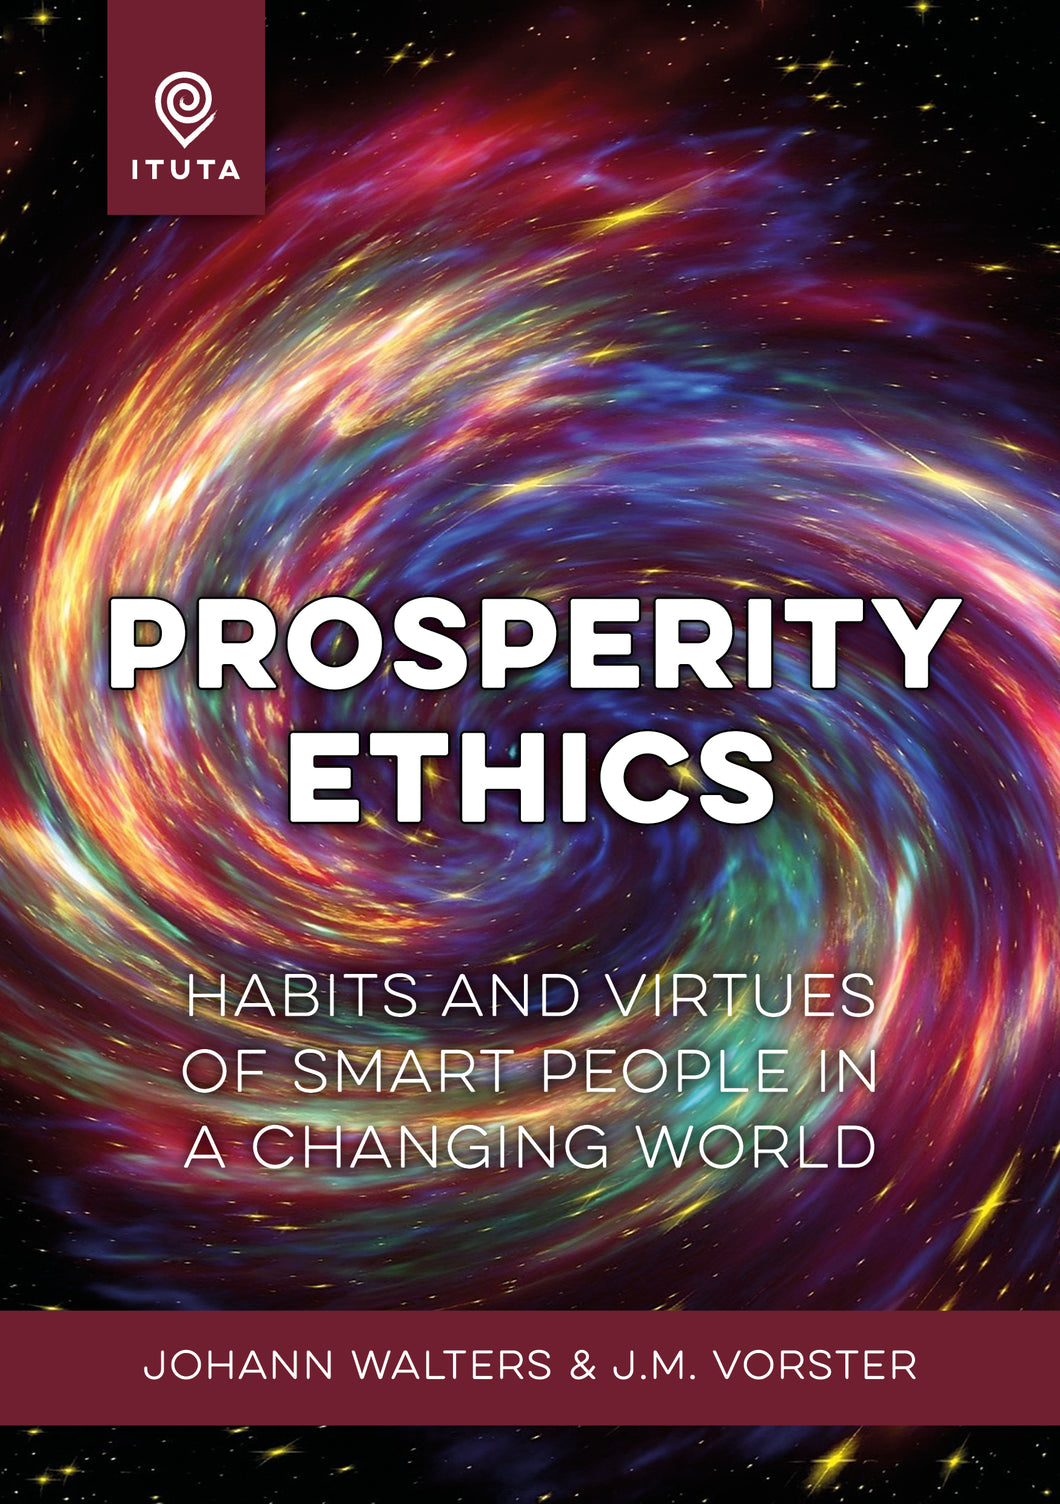 Prosperity ethics: Habits and virtues of smart people in a changing world (Print copy)